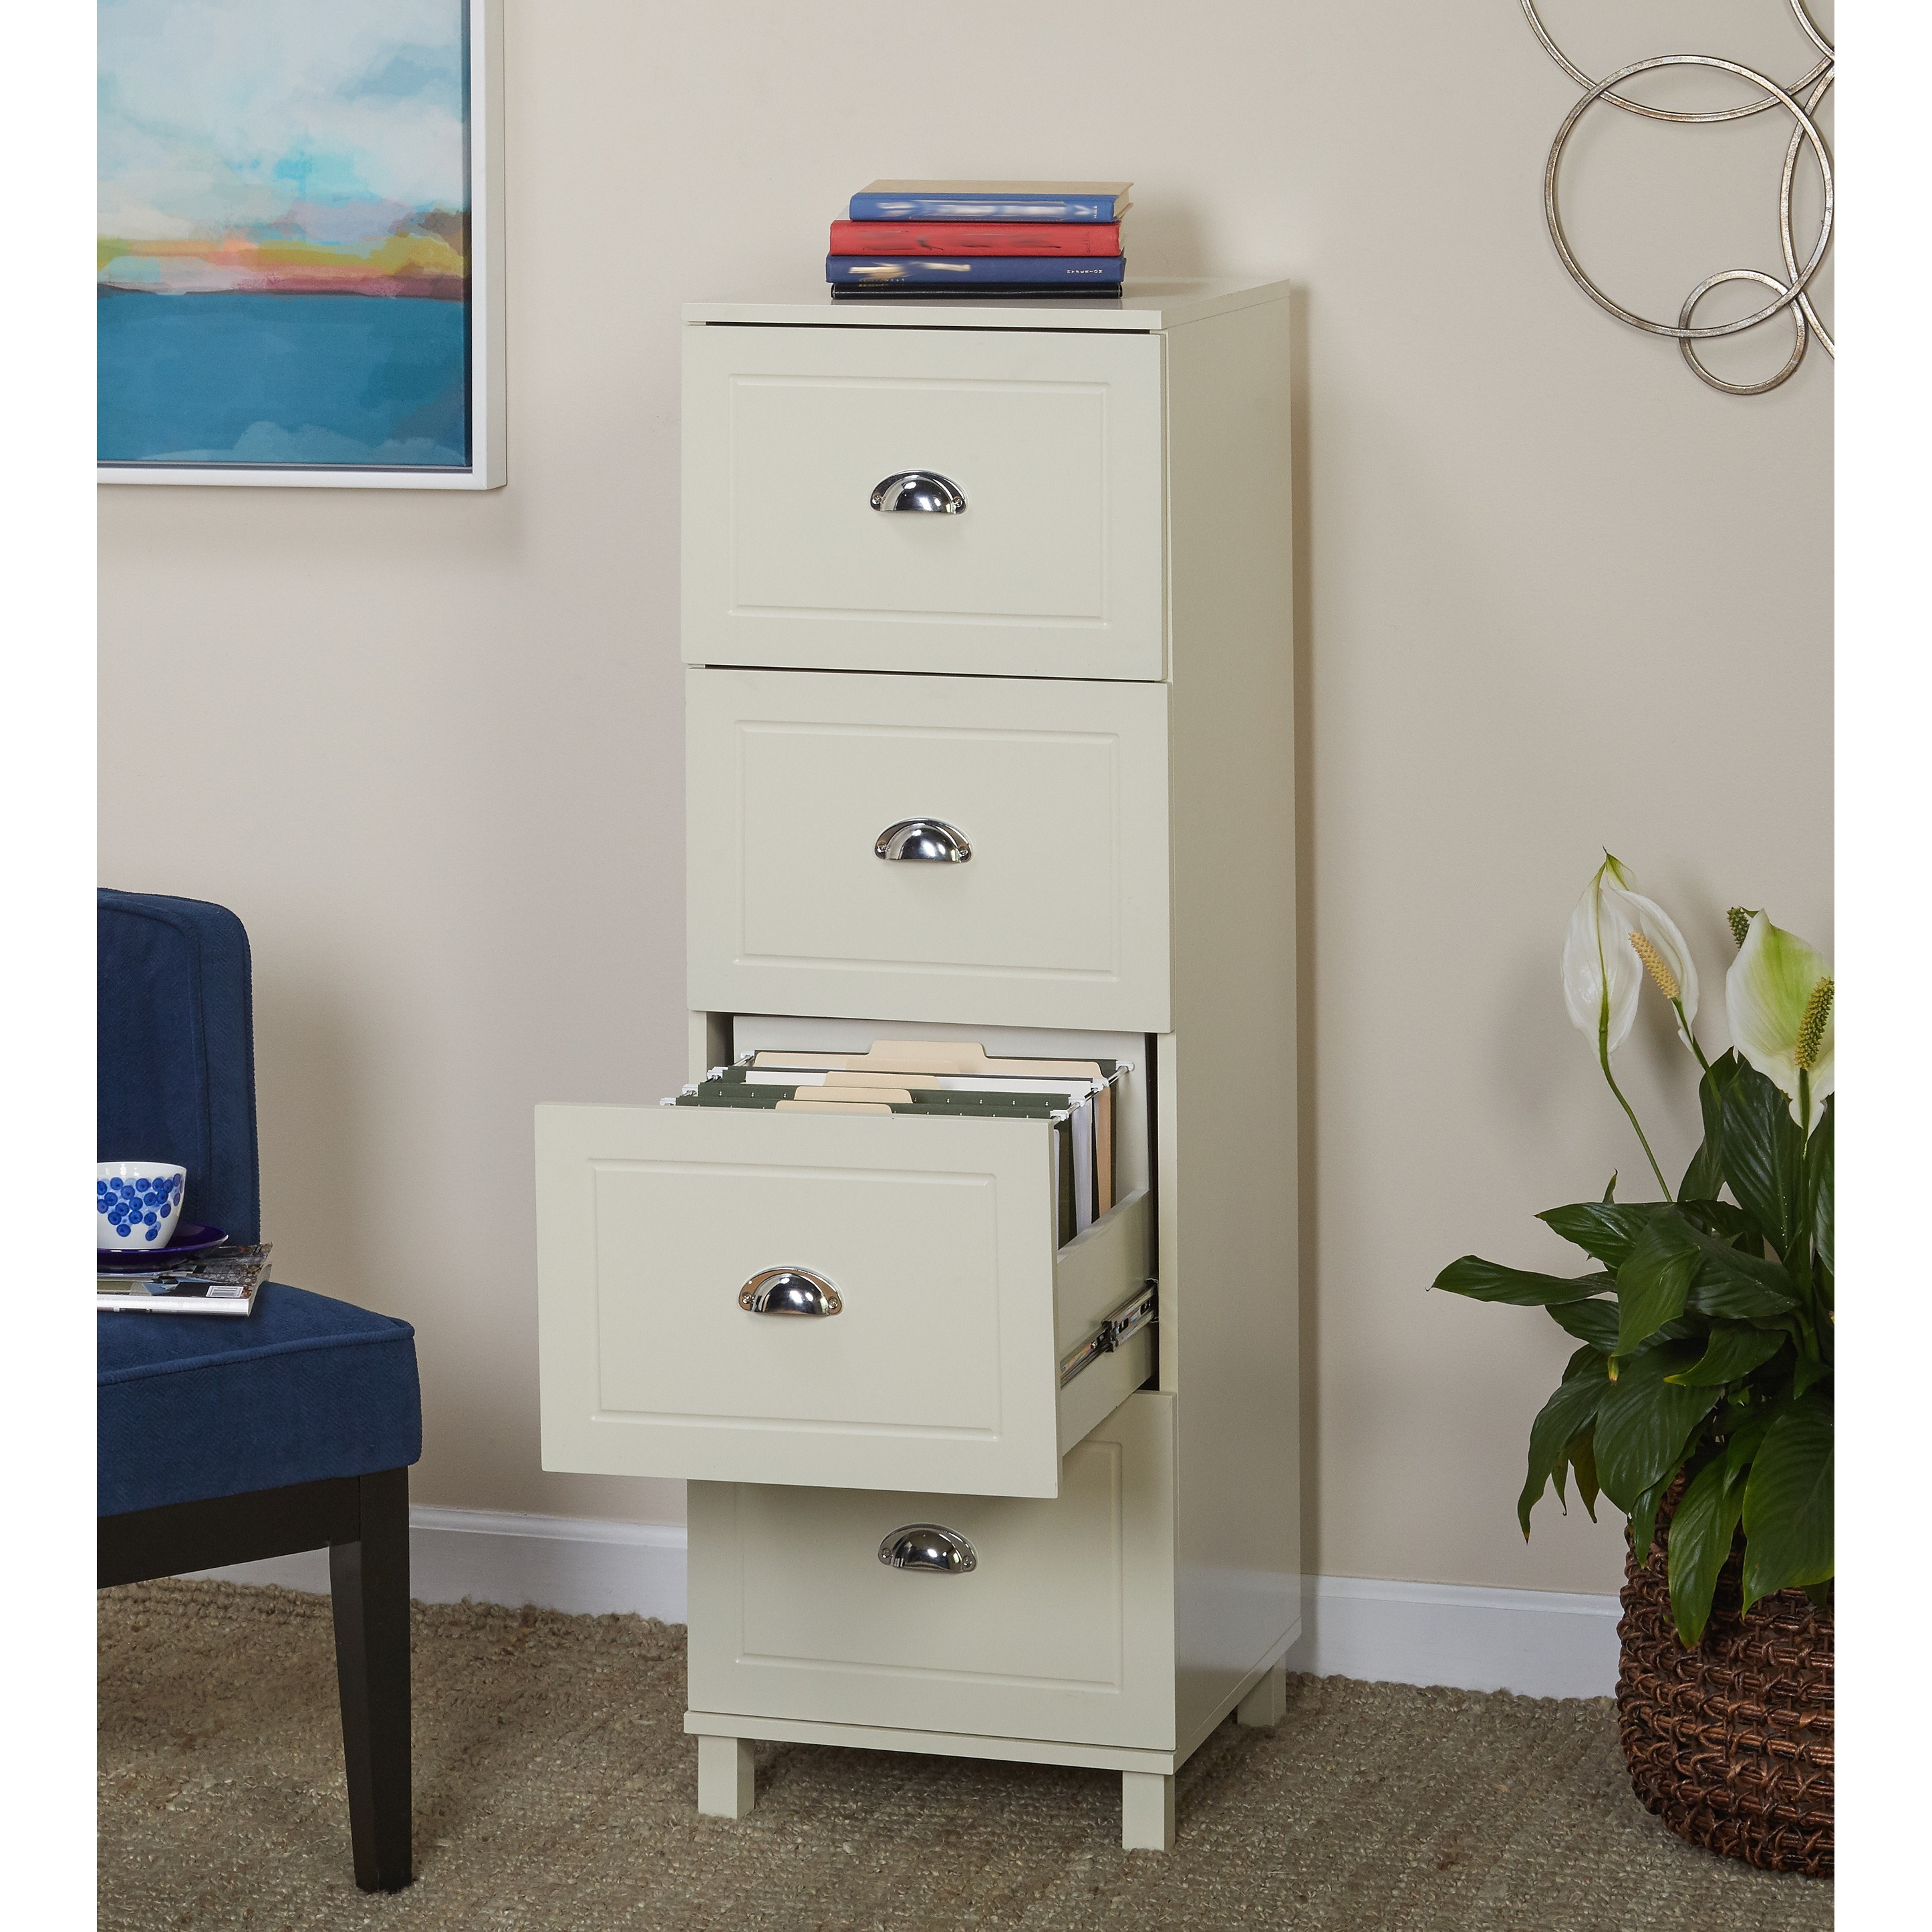 Bradley 4 Drawer Vertical Wood Filing Cabinet White Walmart with proportions 2891 X 2891